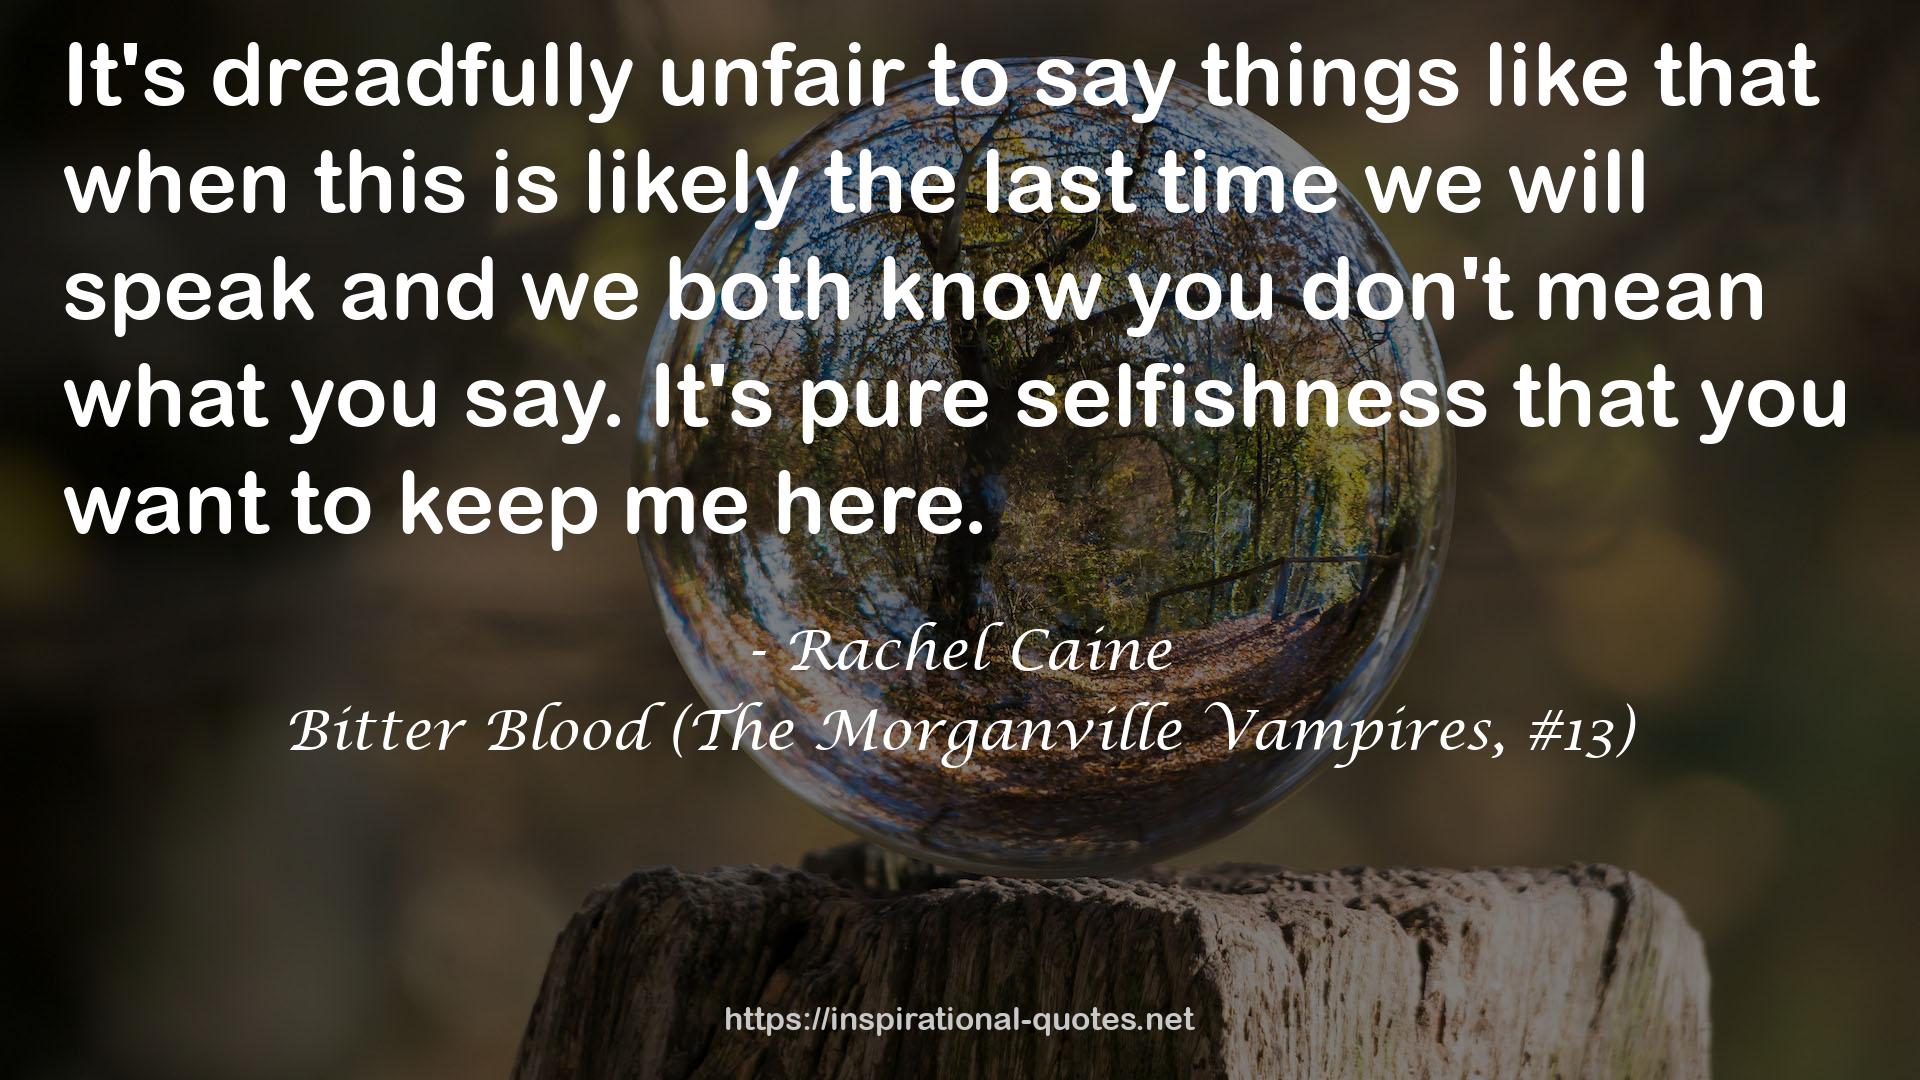 Bitter Blood (The Morganville Vampires, #13) QUOTES